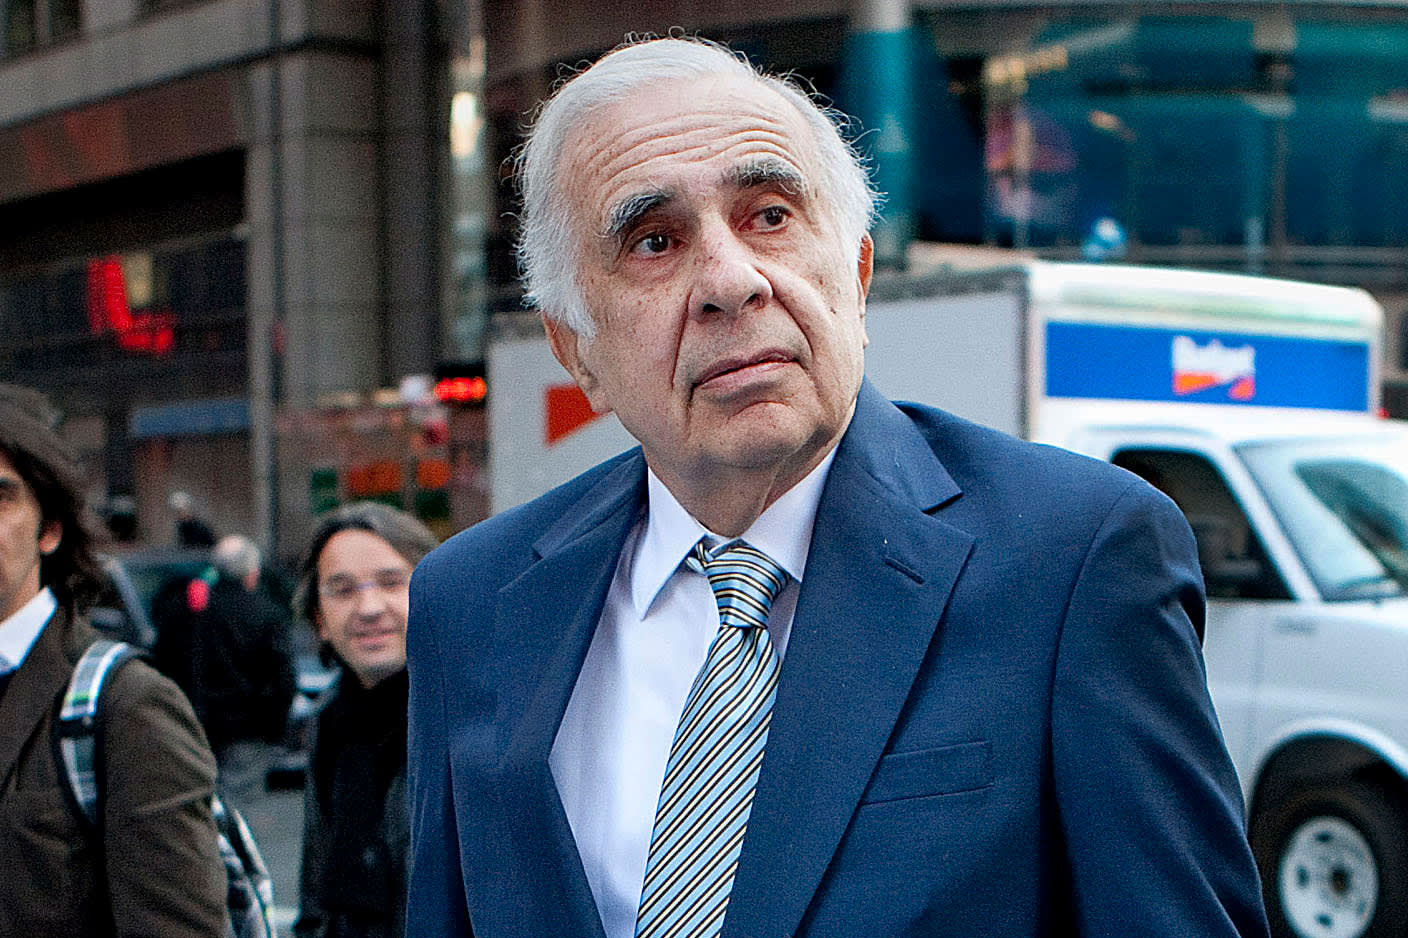 Carl Icahn says the market over the long run will certainly ‘hit the wall’ because of money printing